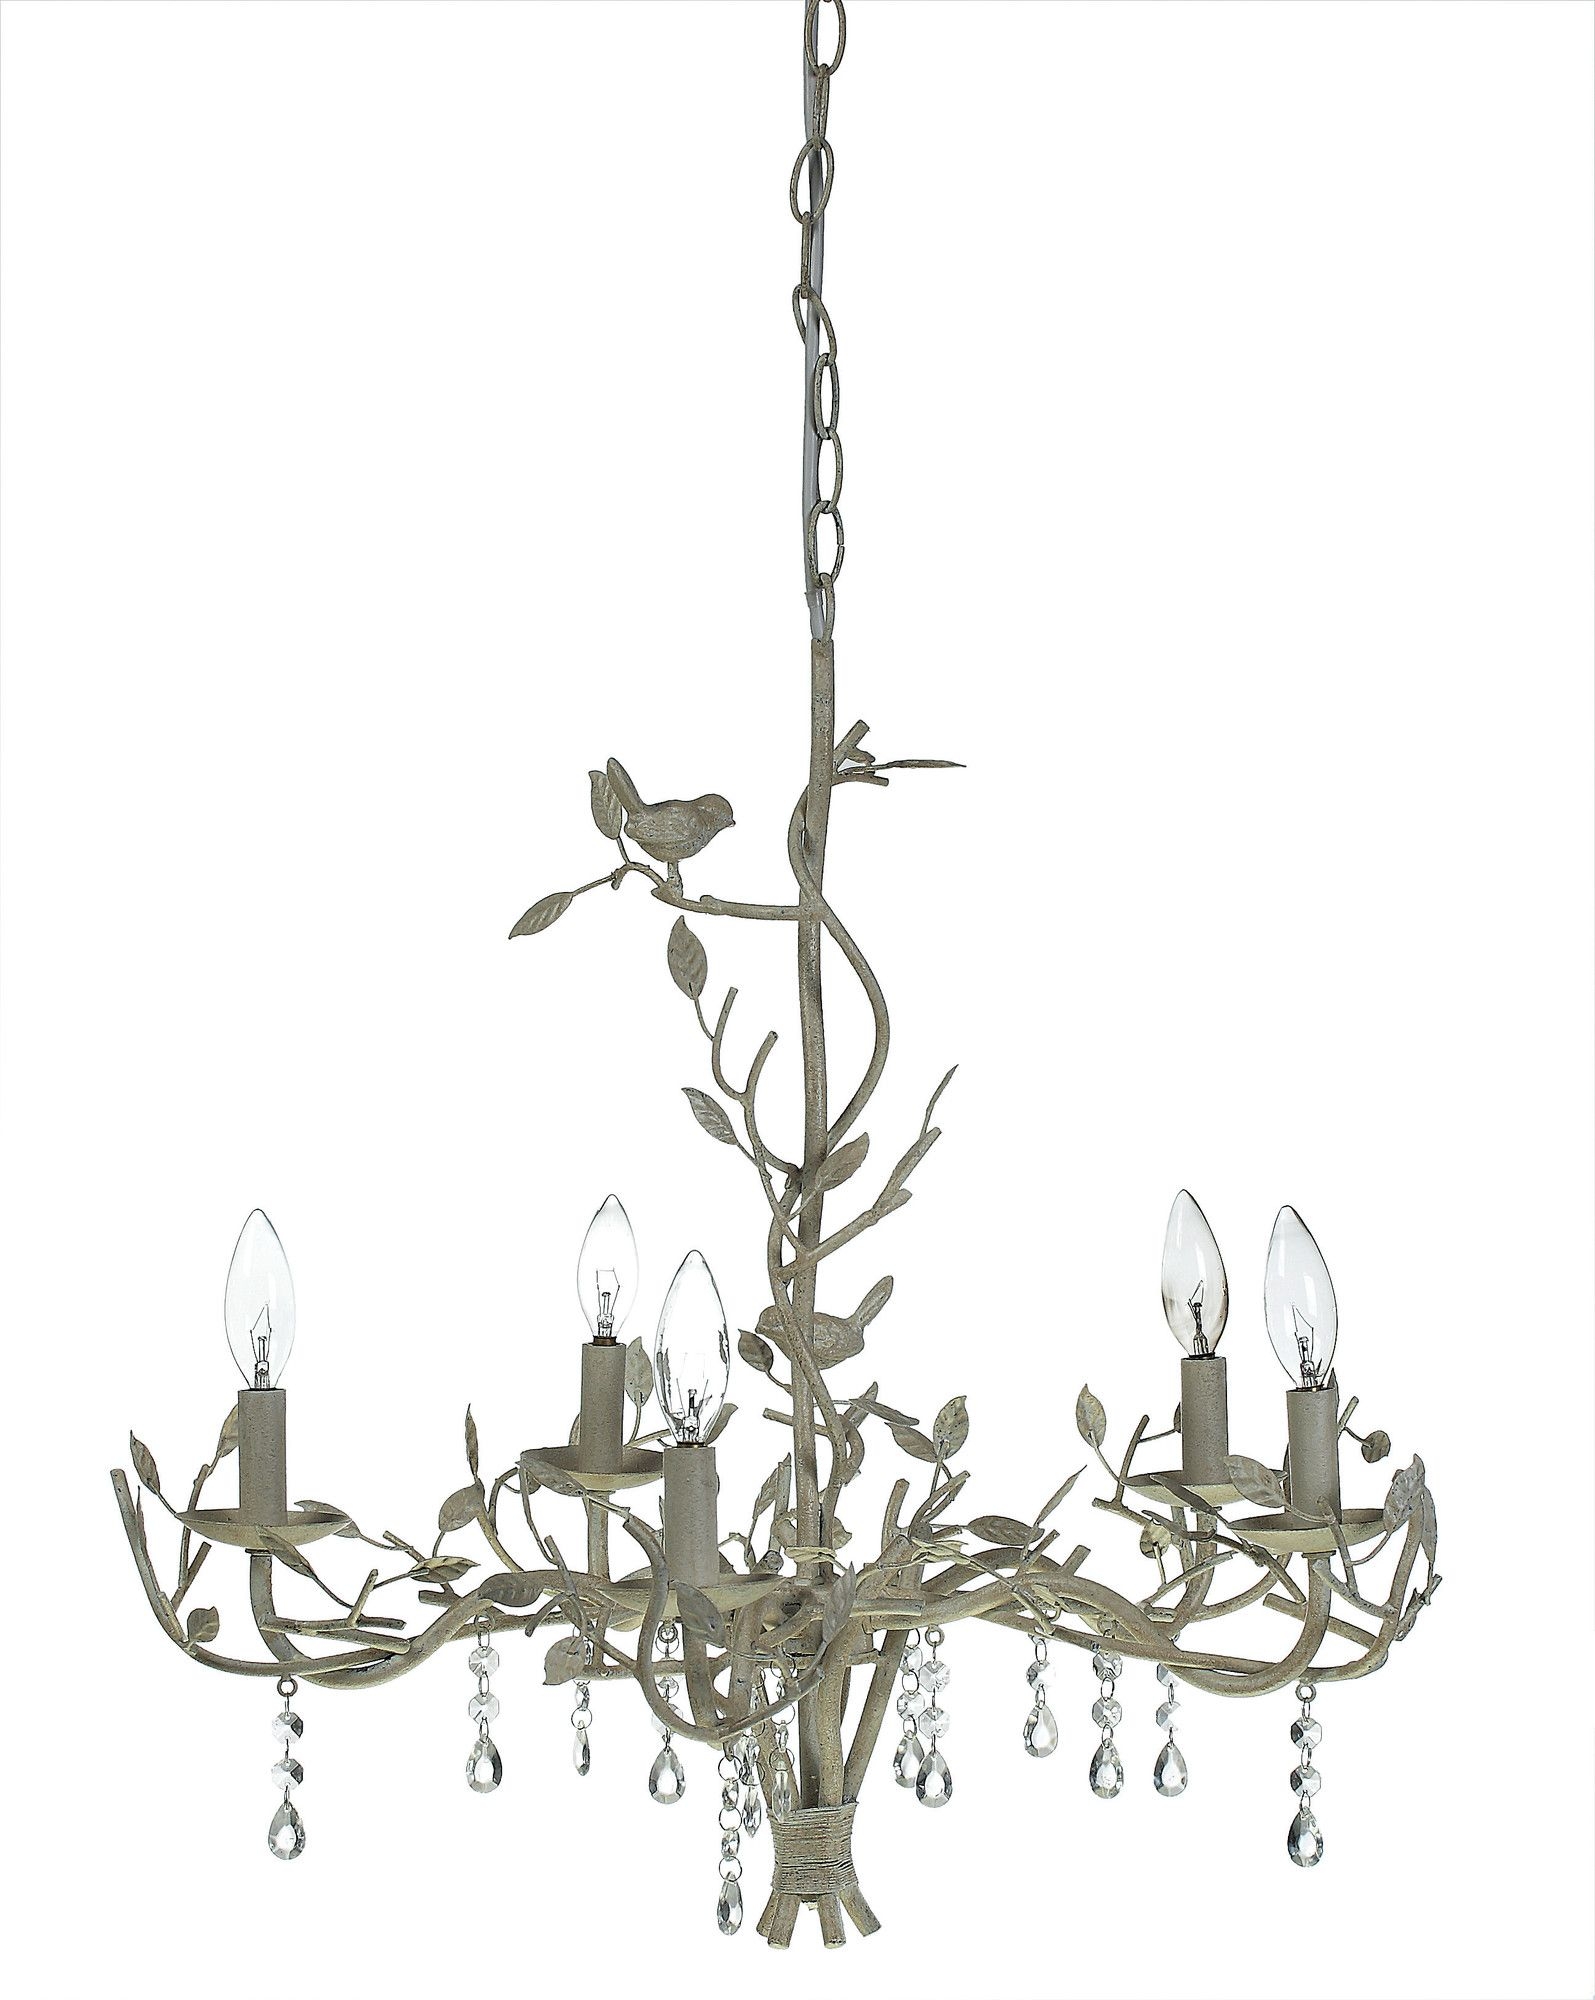 COUNTRY metal CHANDELIER antique white BIRDS electric